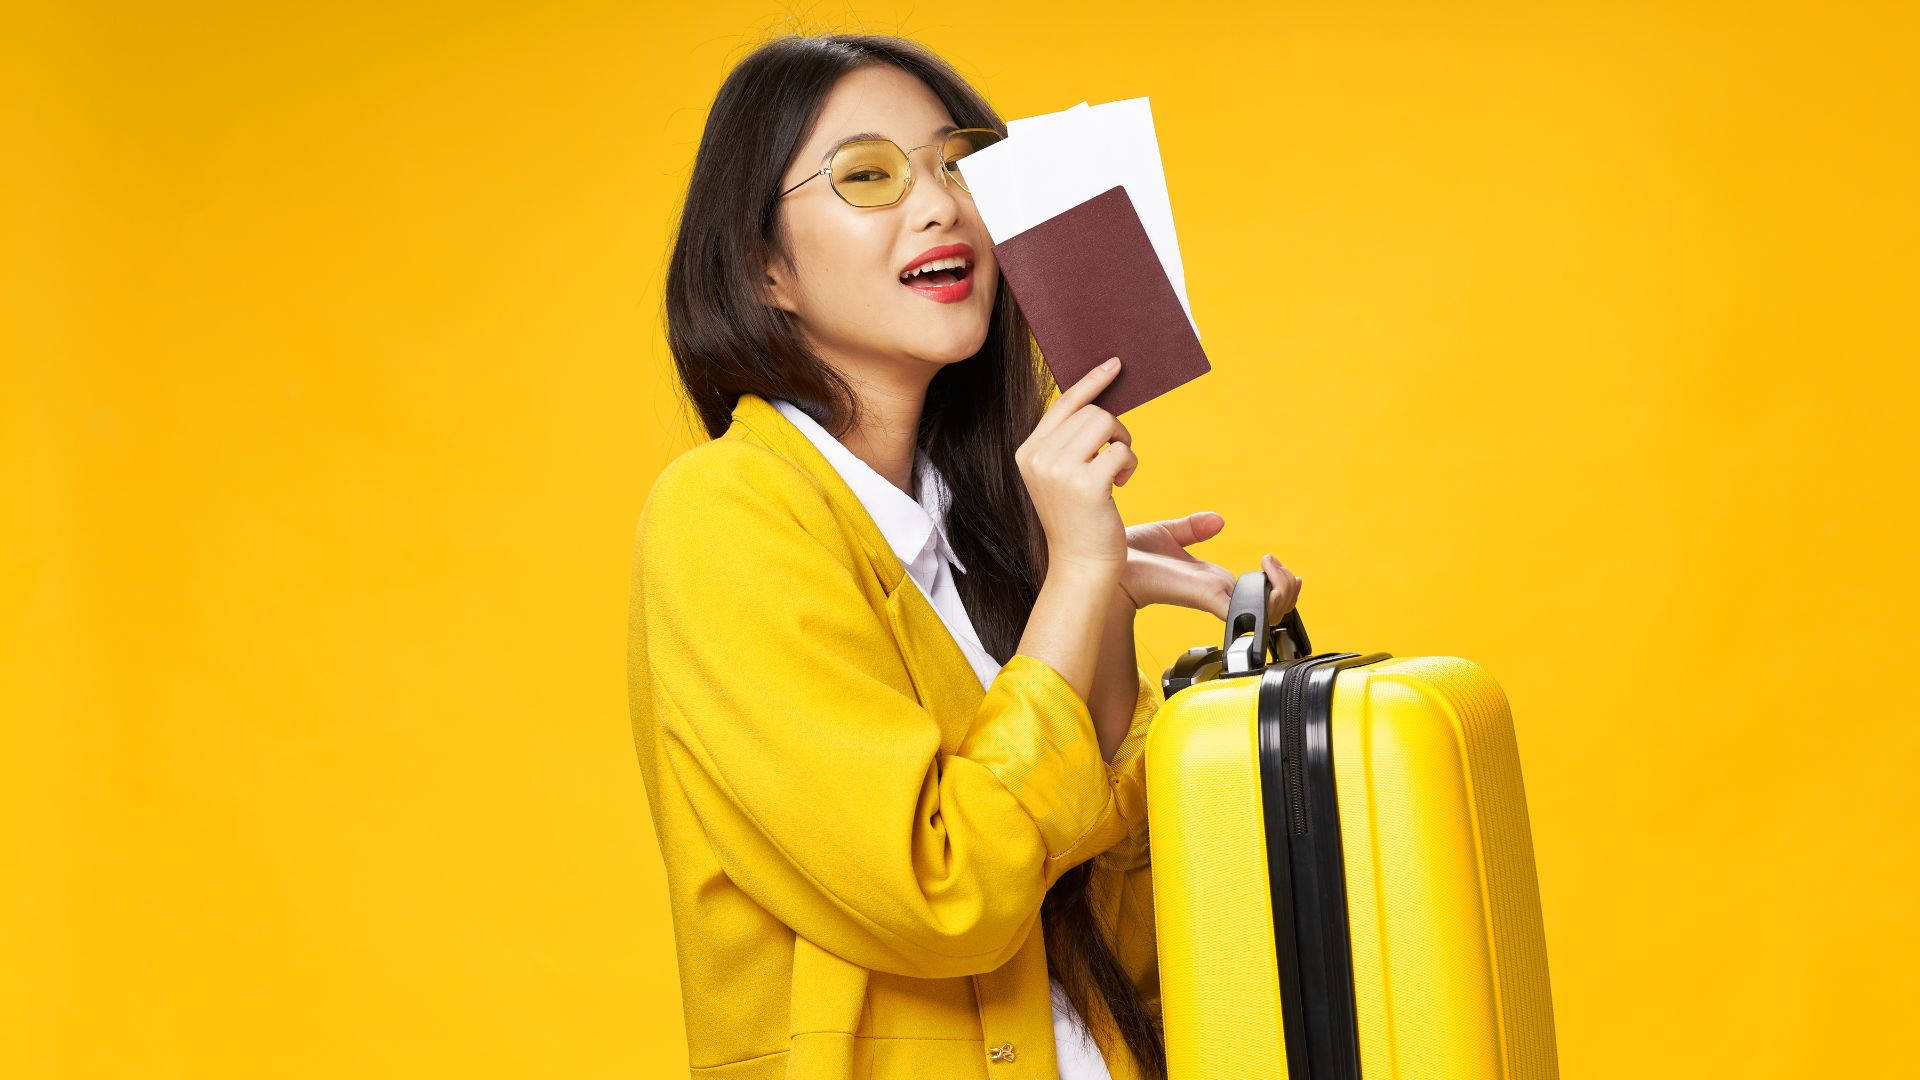 Woman Holding Passport And Yellow Suitcase Wallpaper